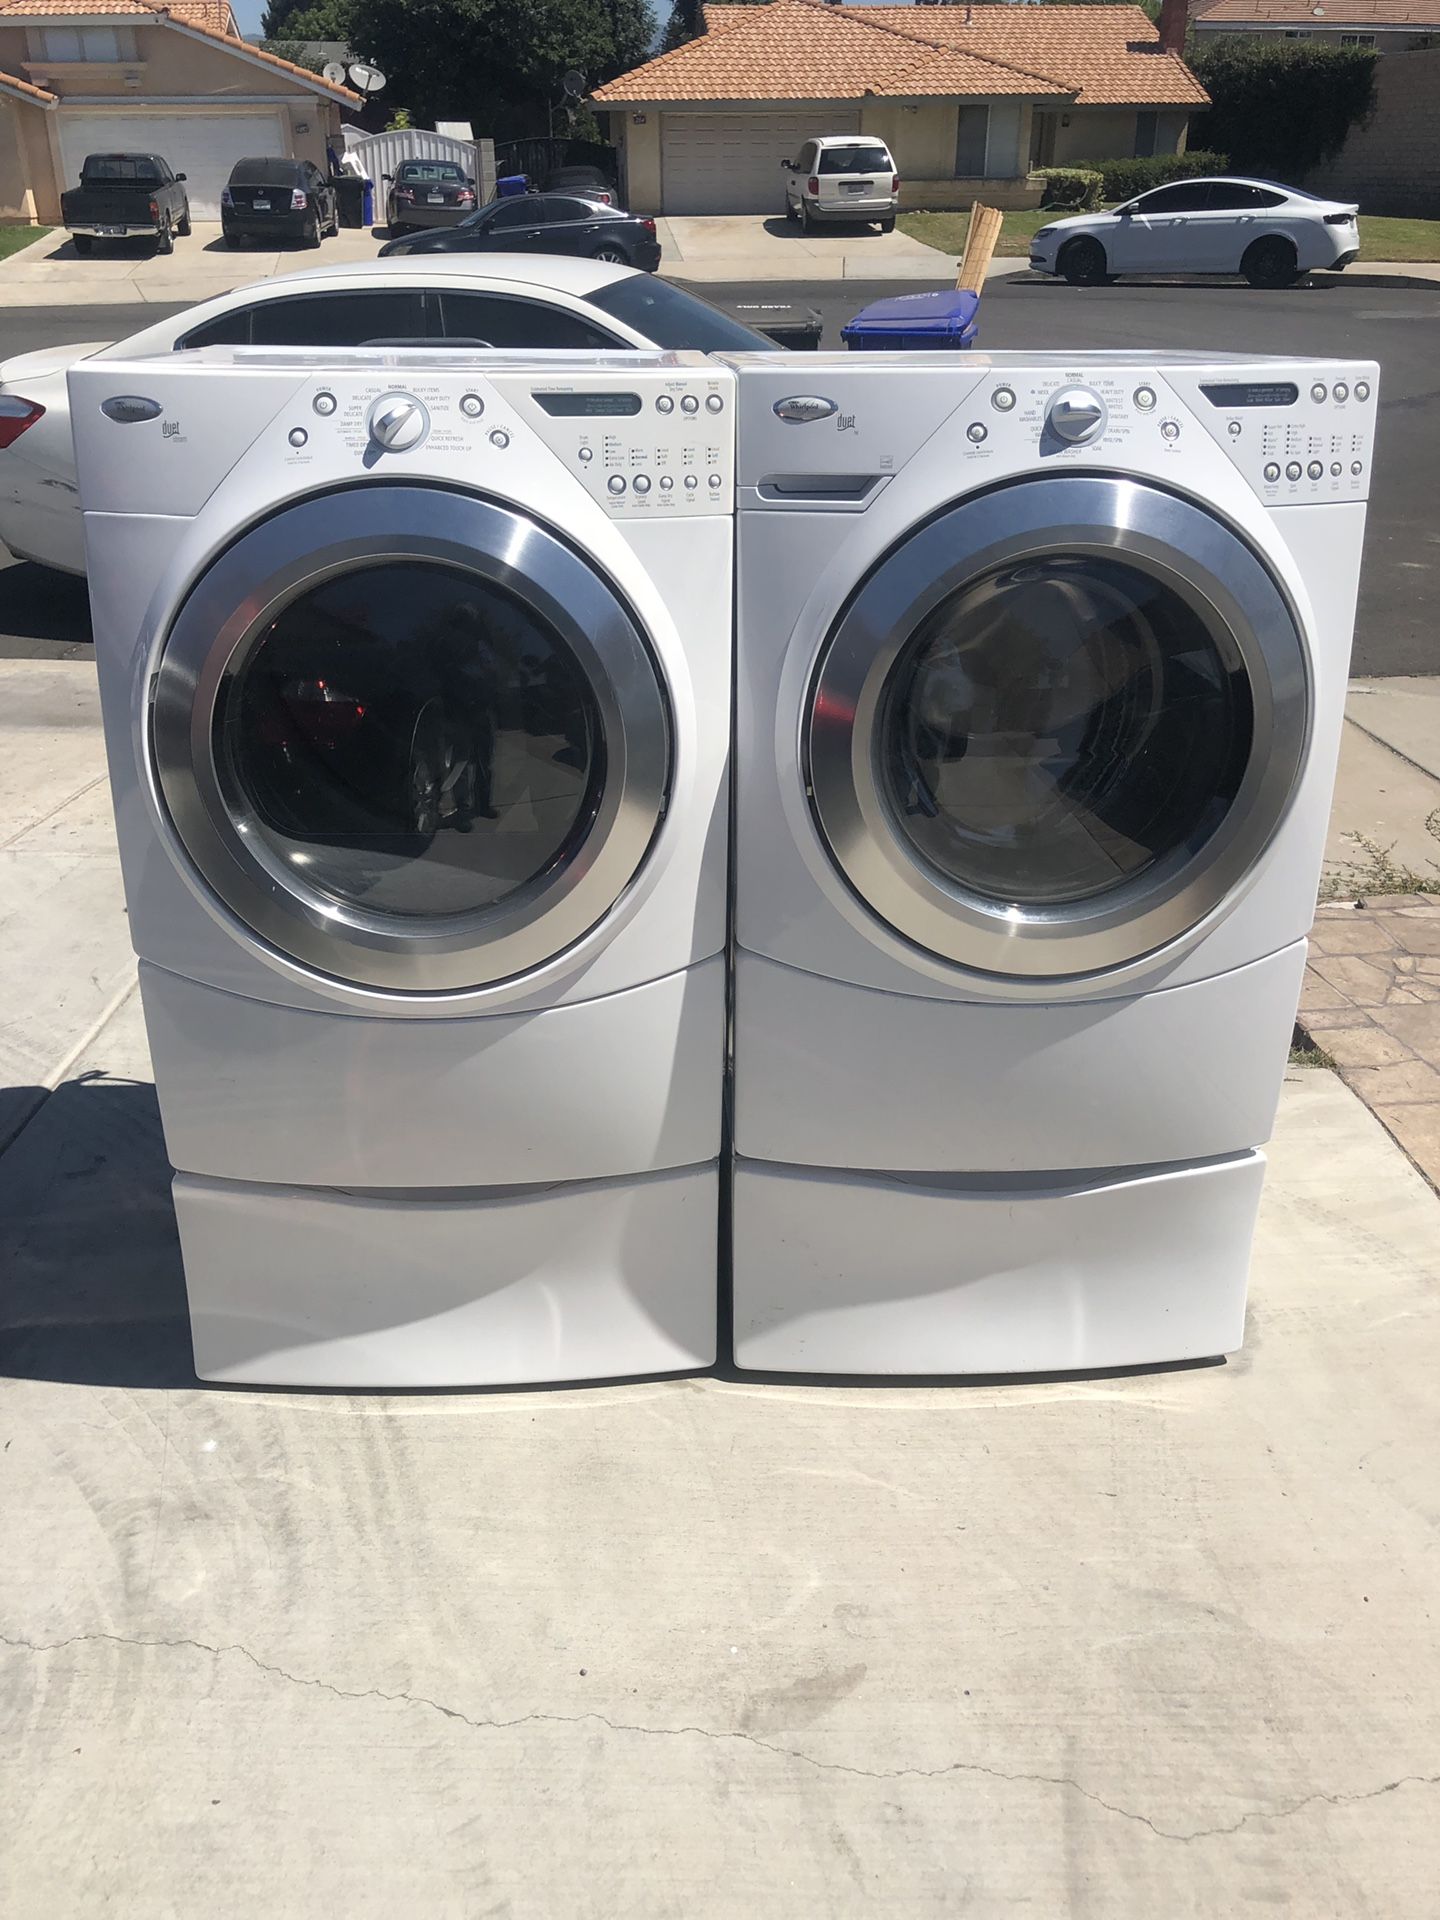 Whirlpool duet washer and dryer gas heavy duty super capacity plus good condition deliver and installation available